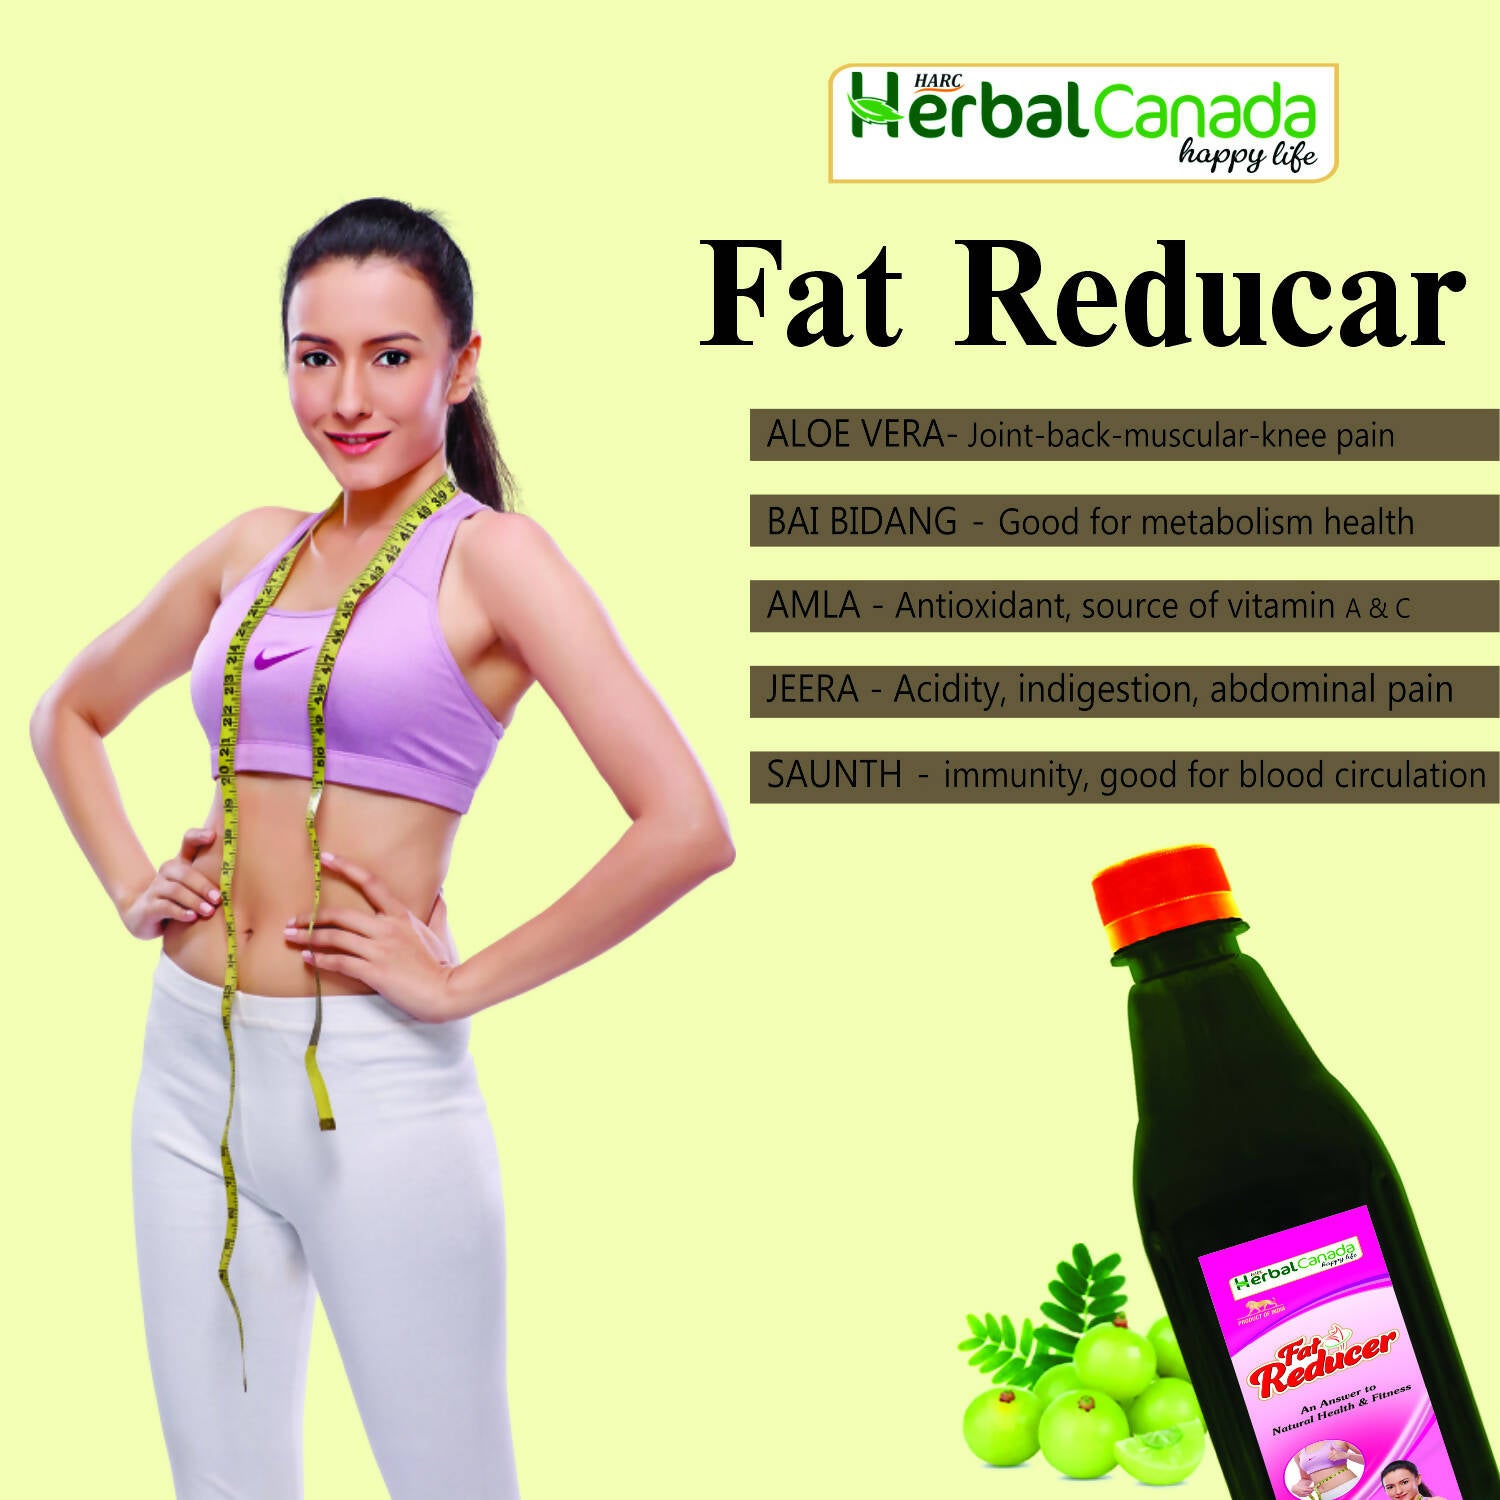 Buy Herbal Canada Fat Reducer Online at Best Price